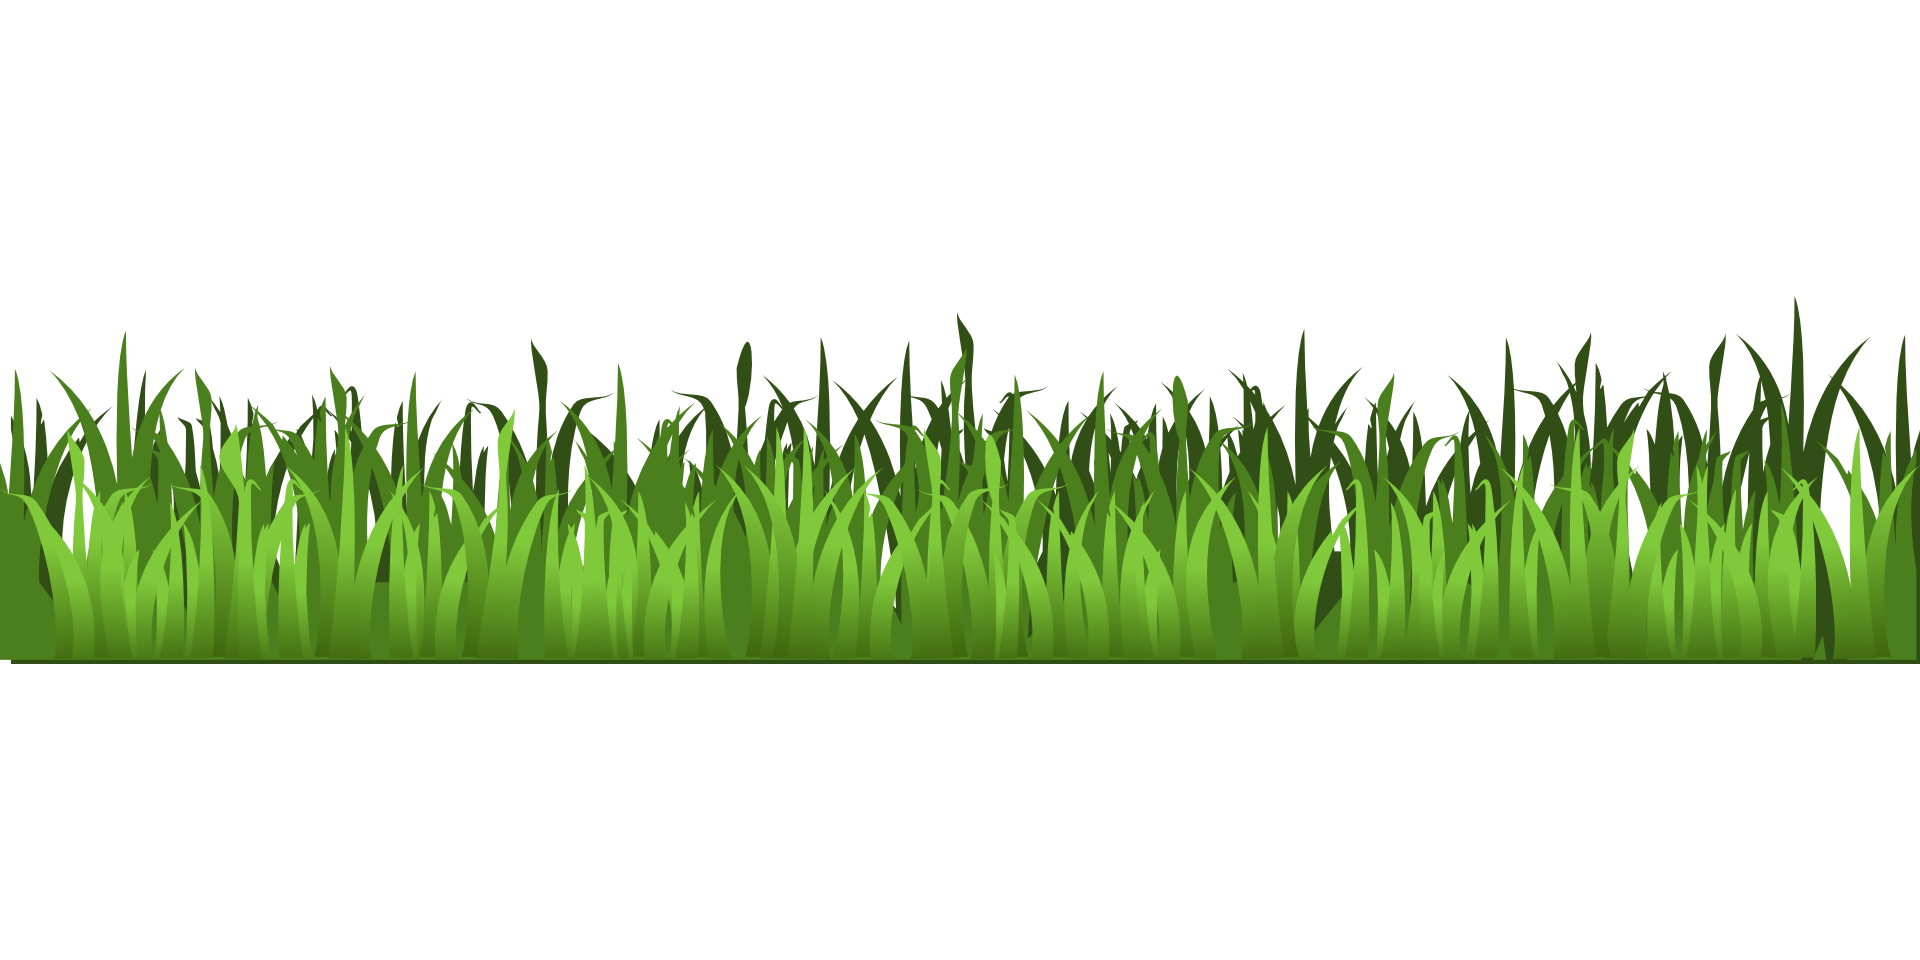 Grass clip art to download 2